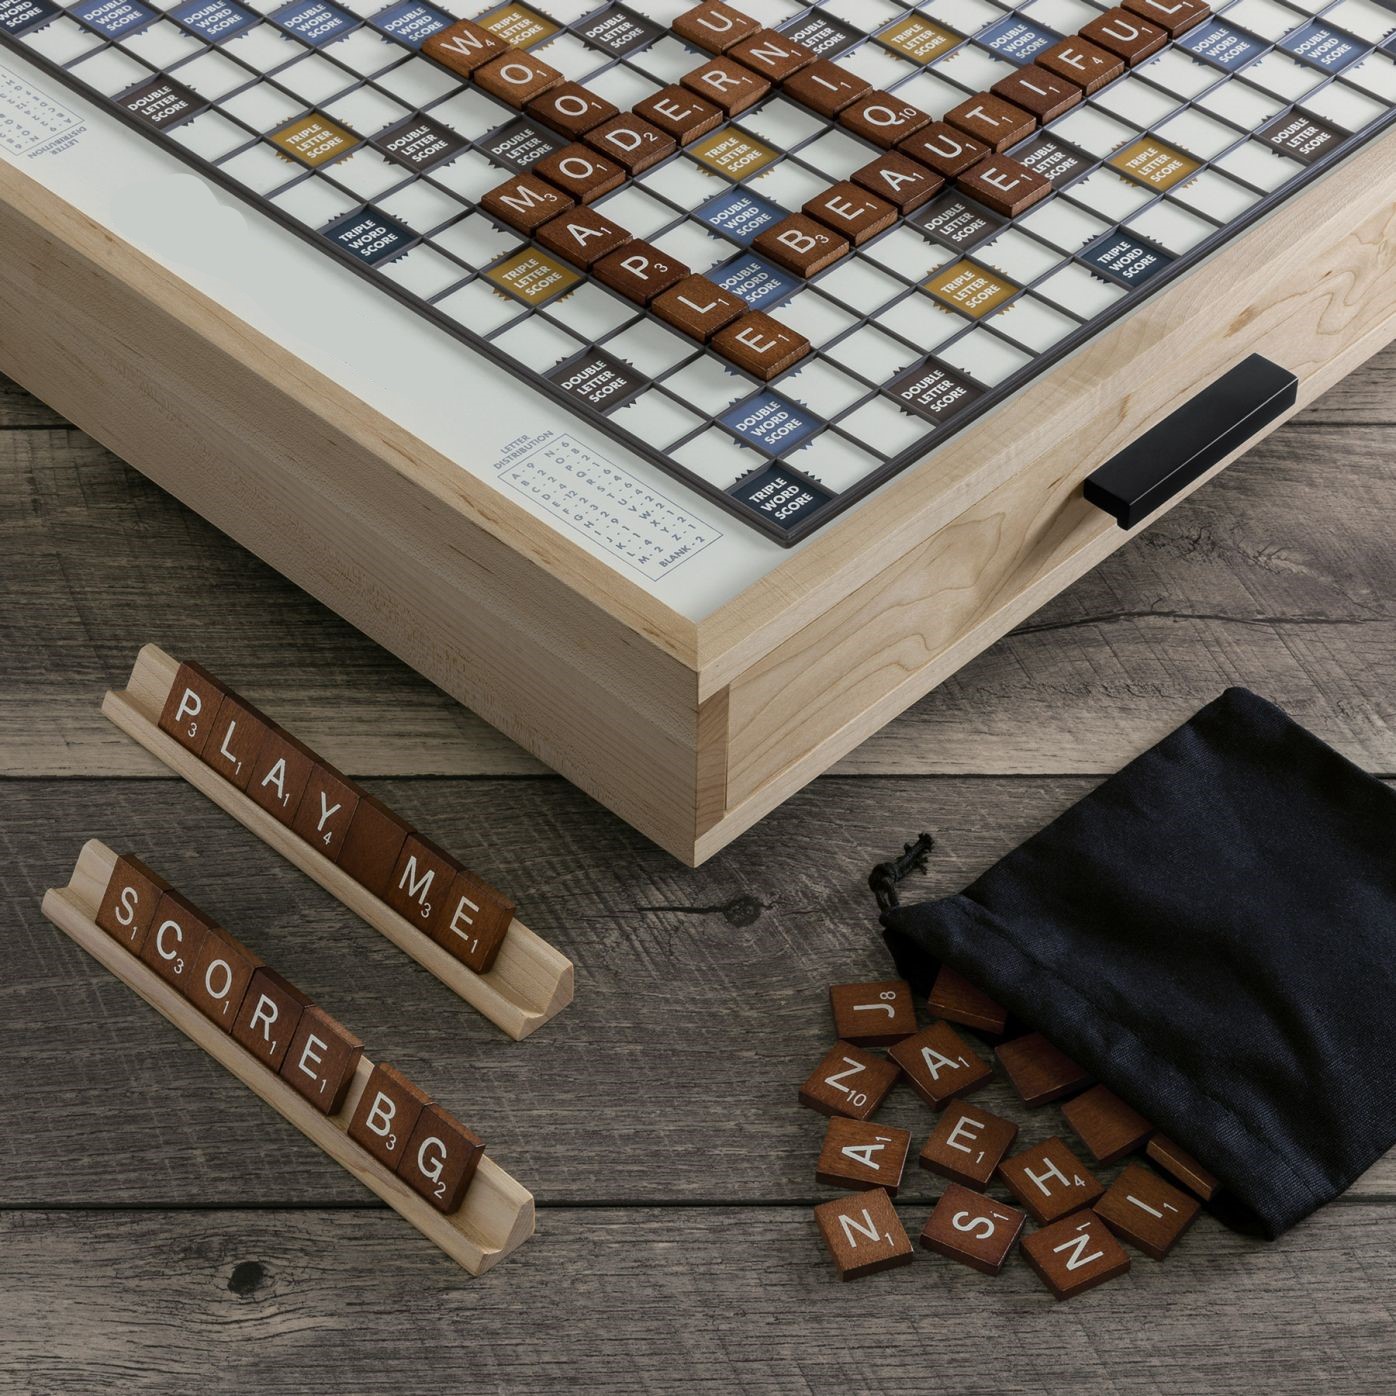 Desk top crossword  board game with turntable-Natural color